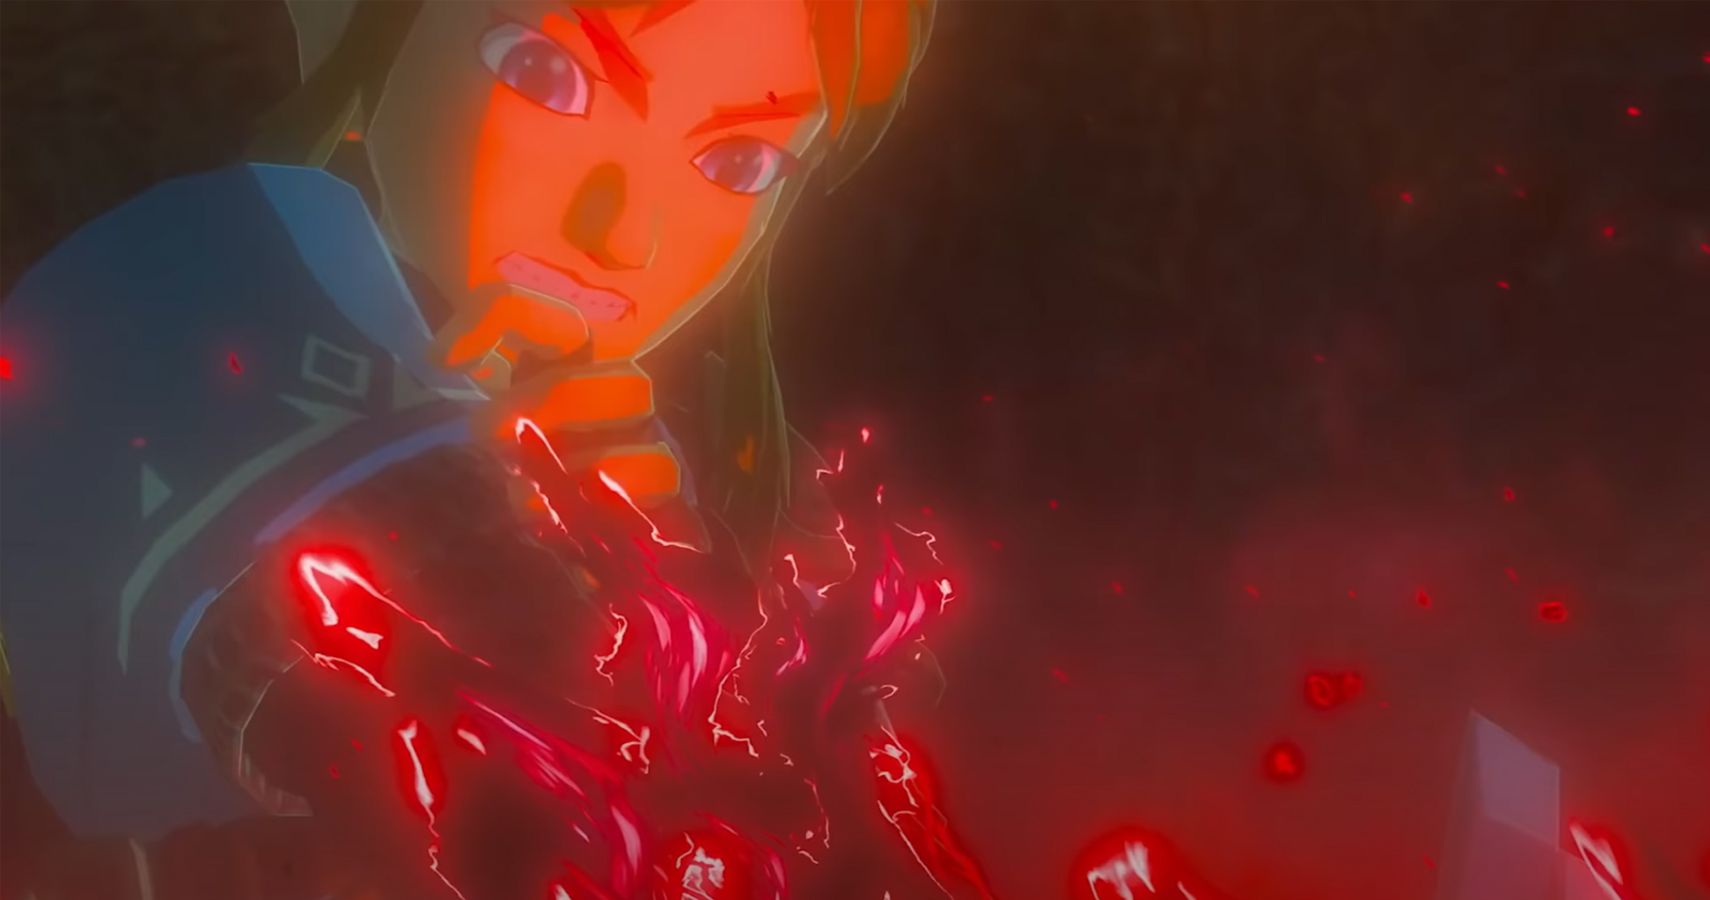 Link in the BOTW2 trailer being overcome by some sort of power